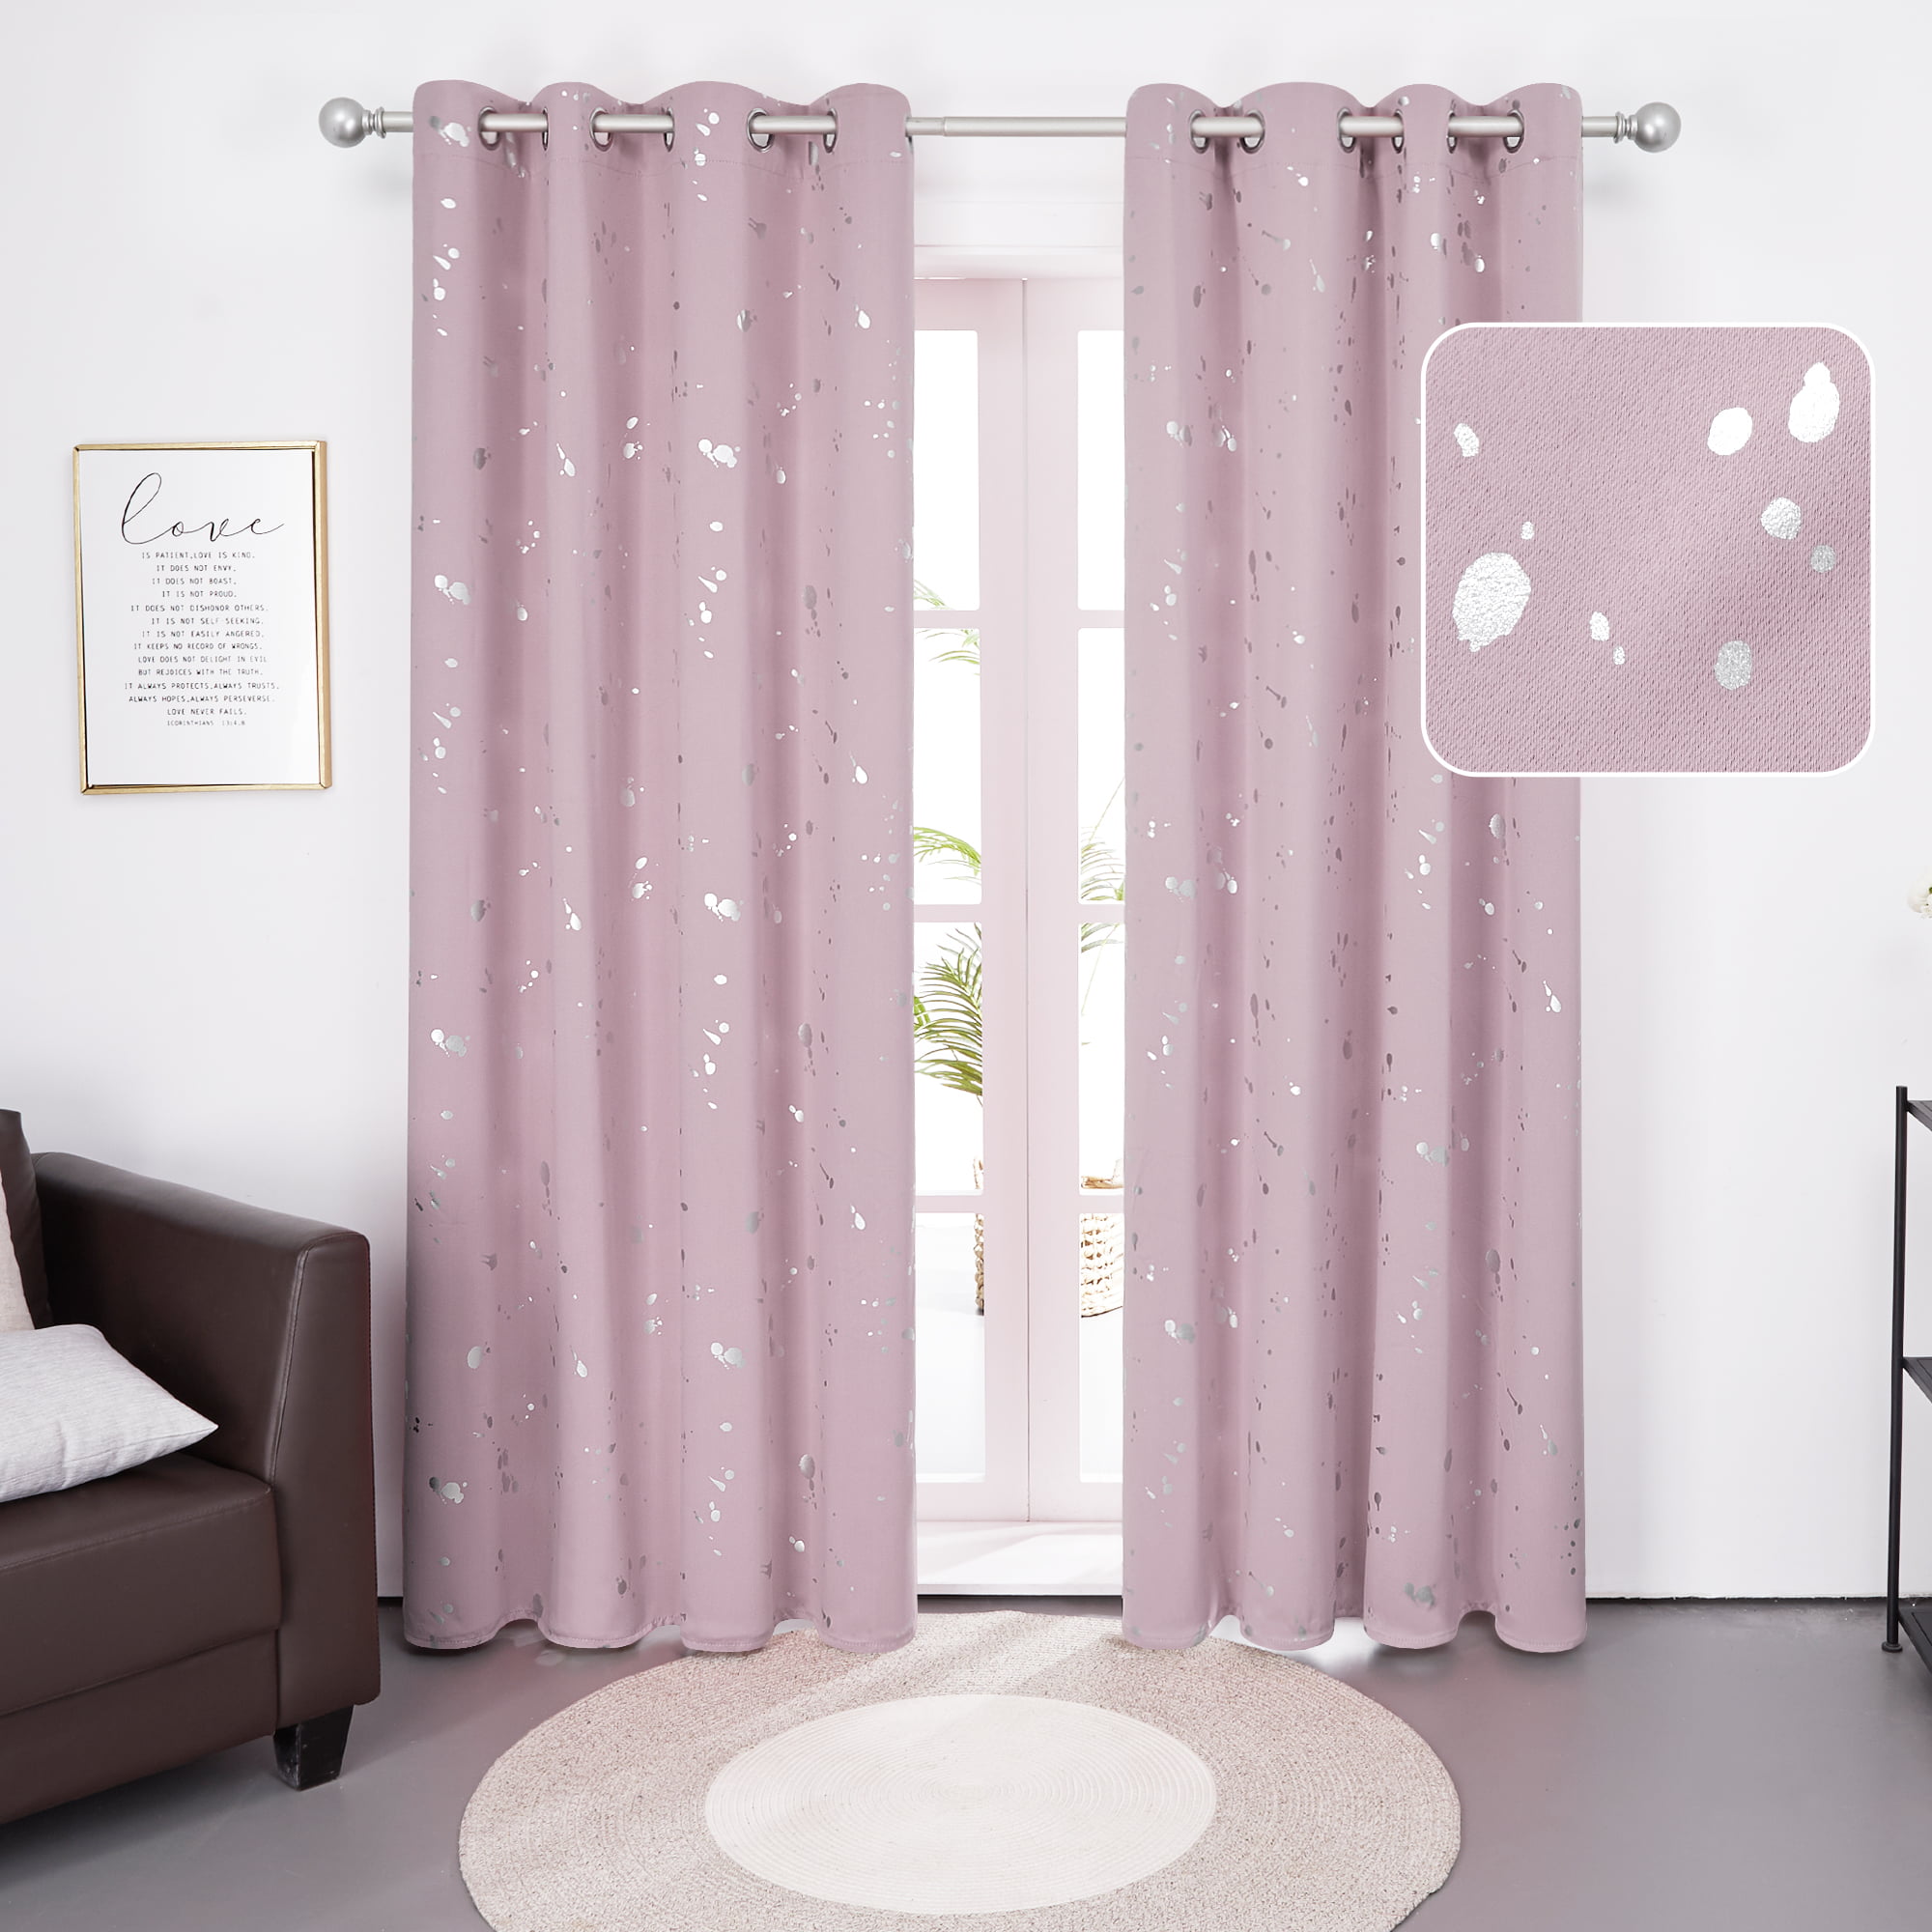 Details about   Space World Maze Play Game Kids Earth Window Living Room Bedroom Curtains Drapes 